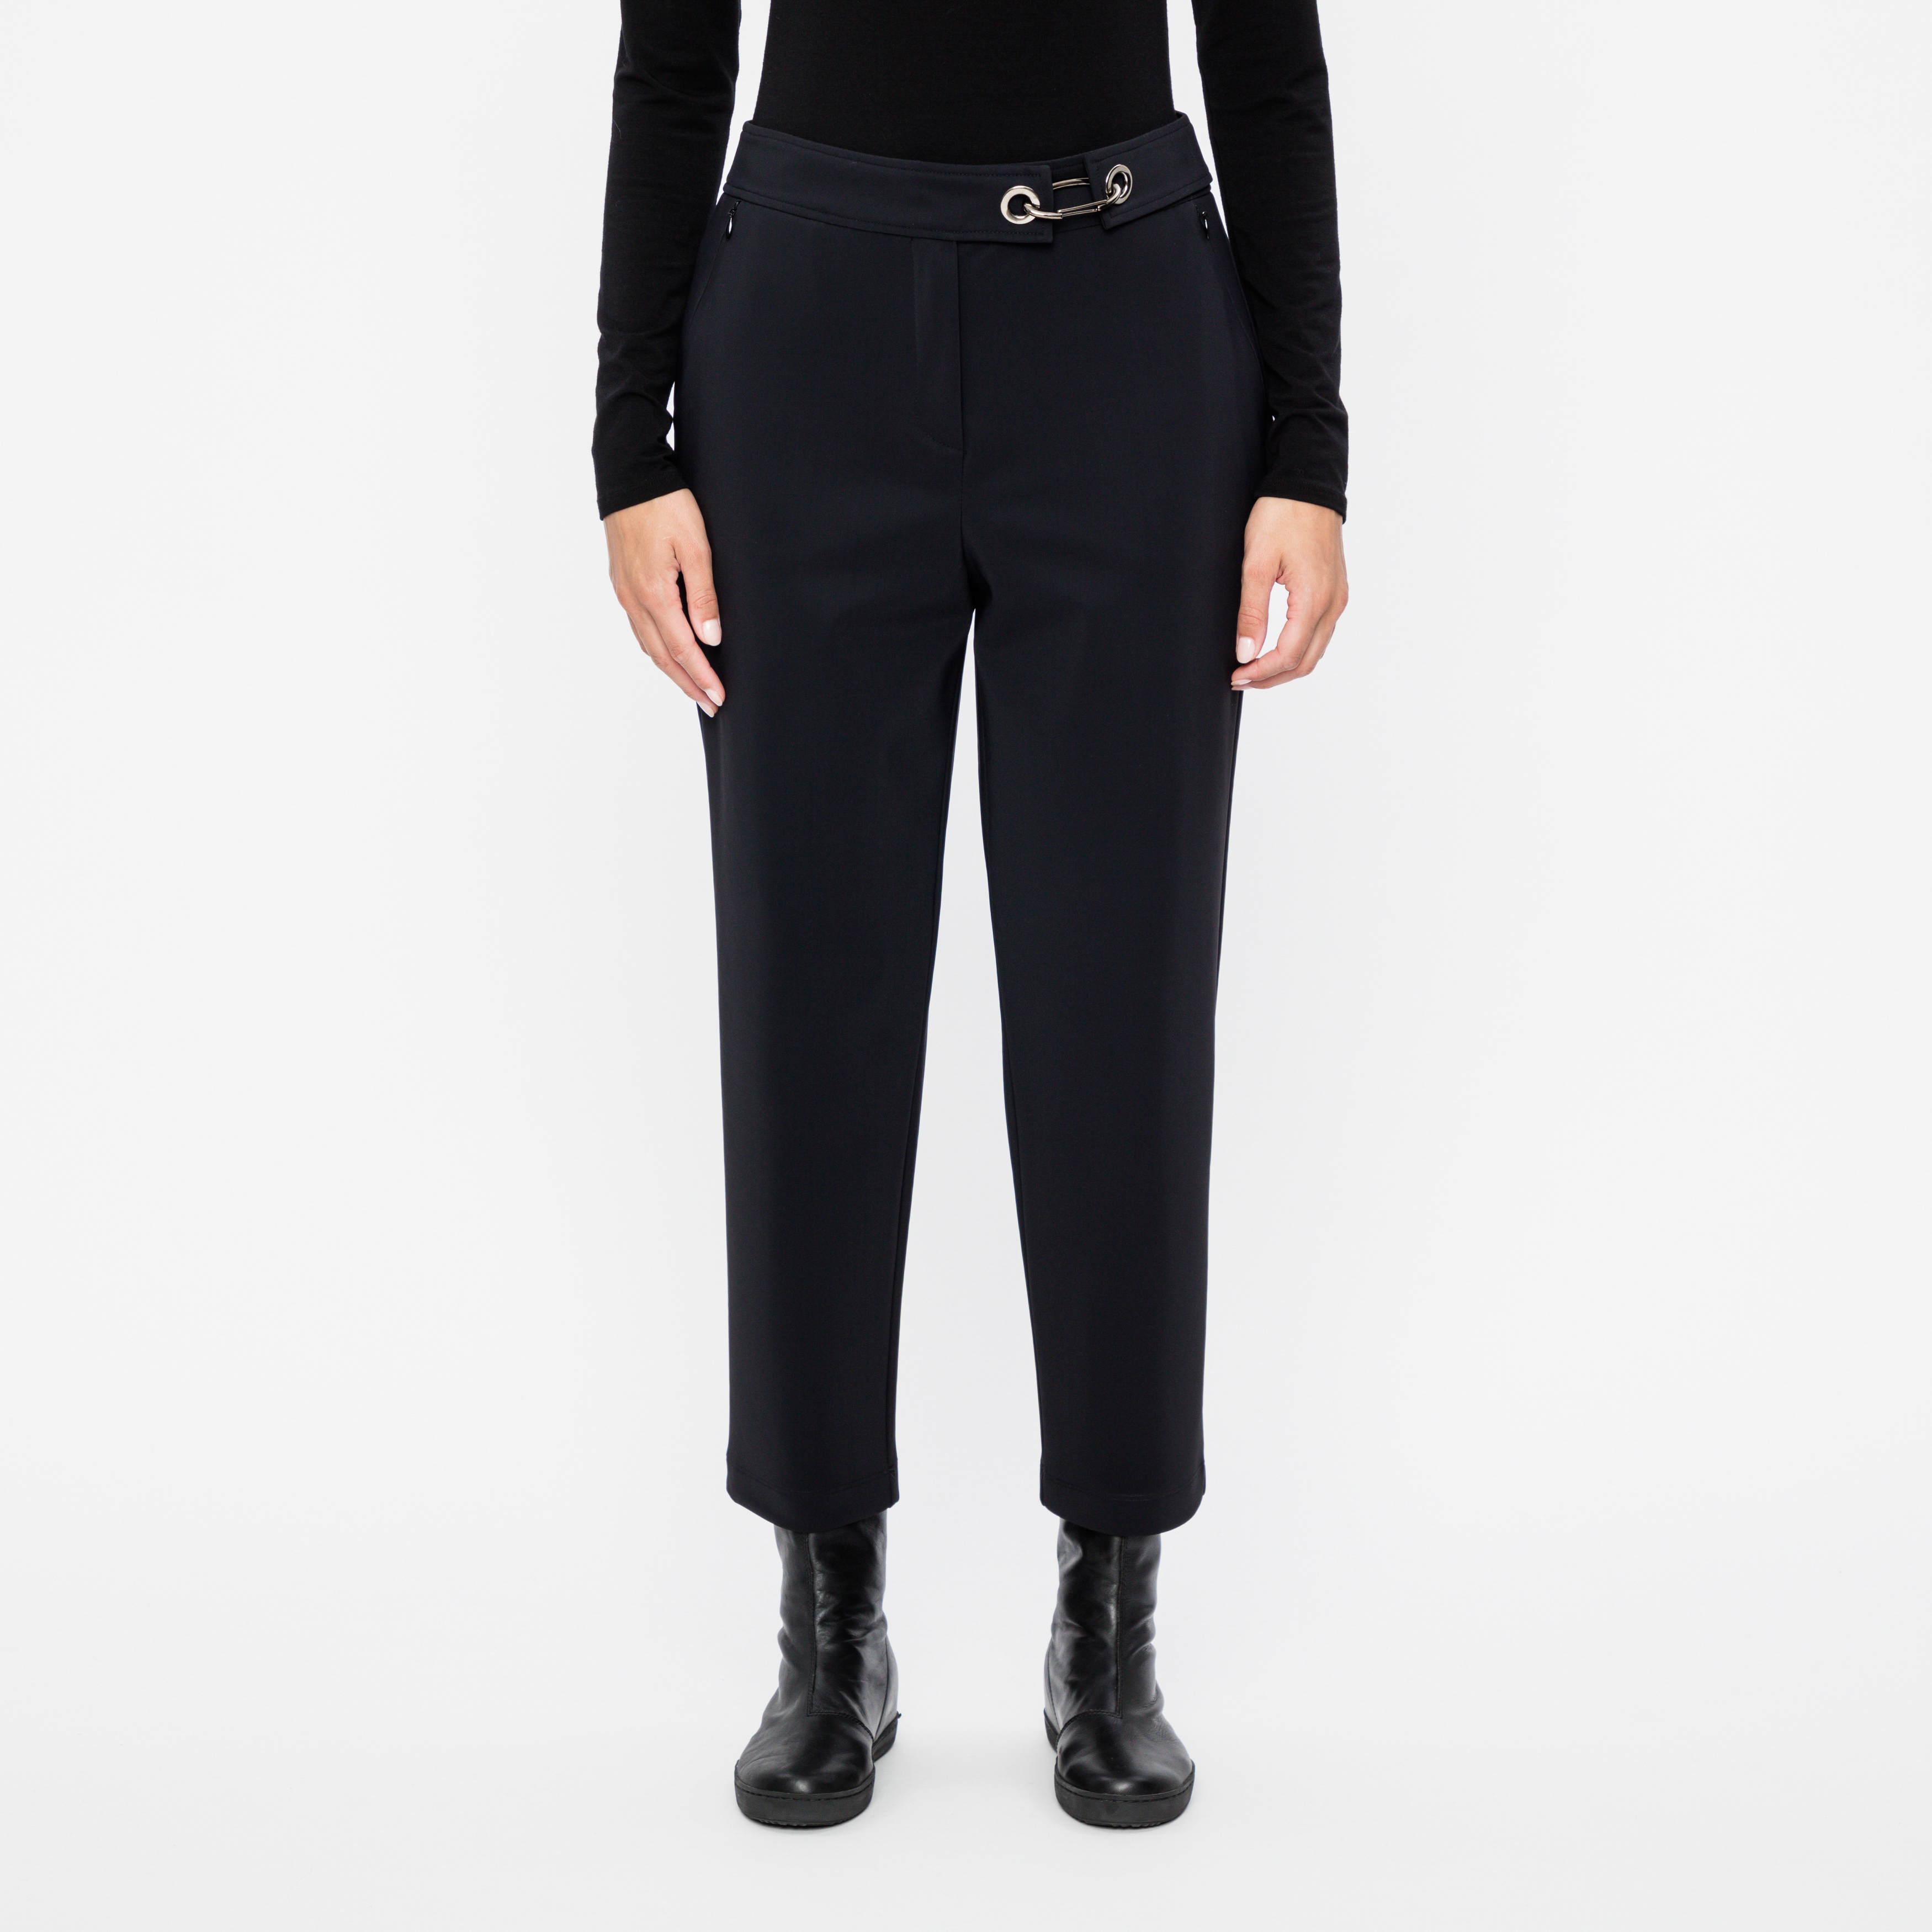 Black cropped pants - chain link belt by Sarah Pacini